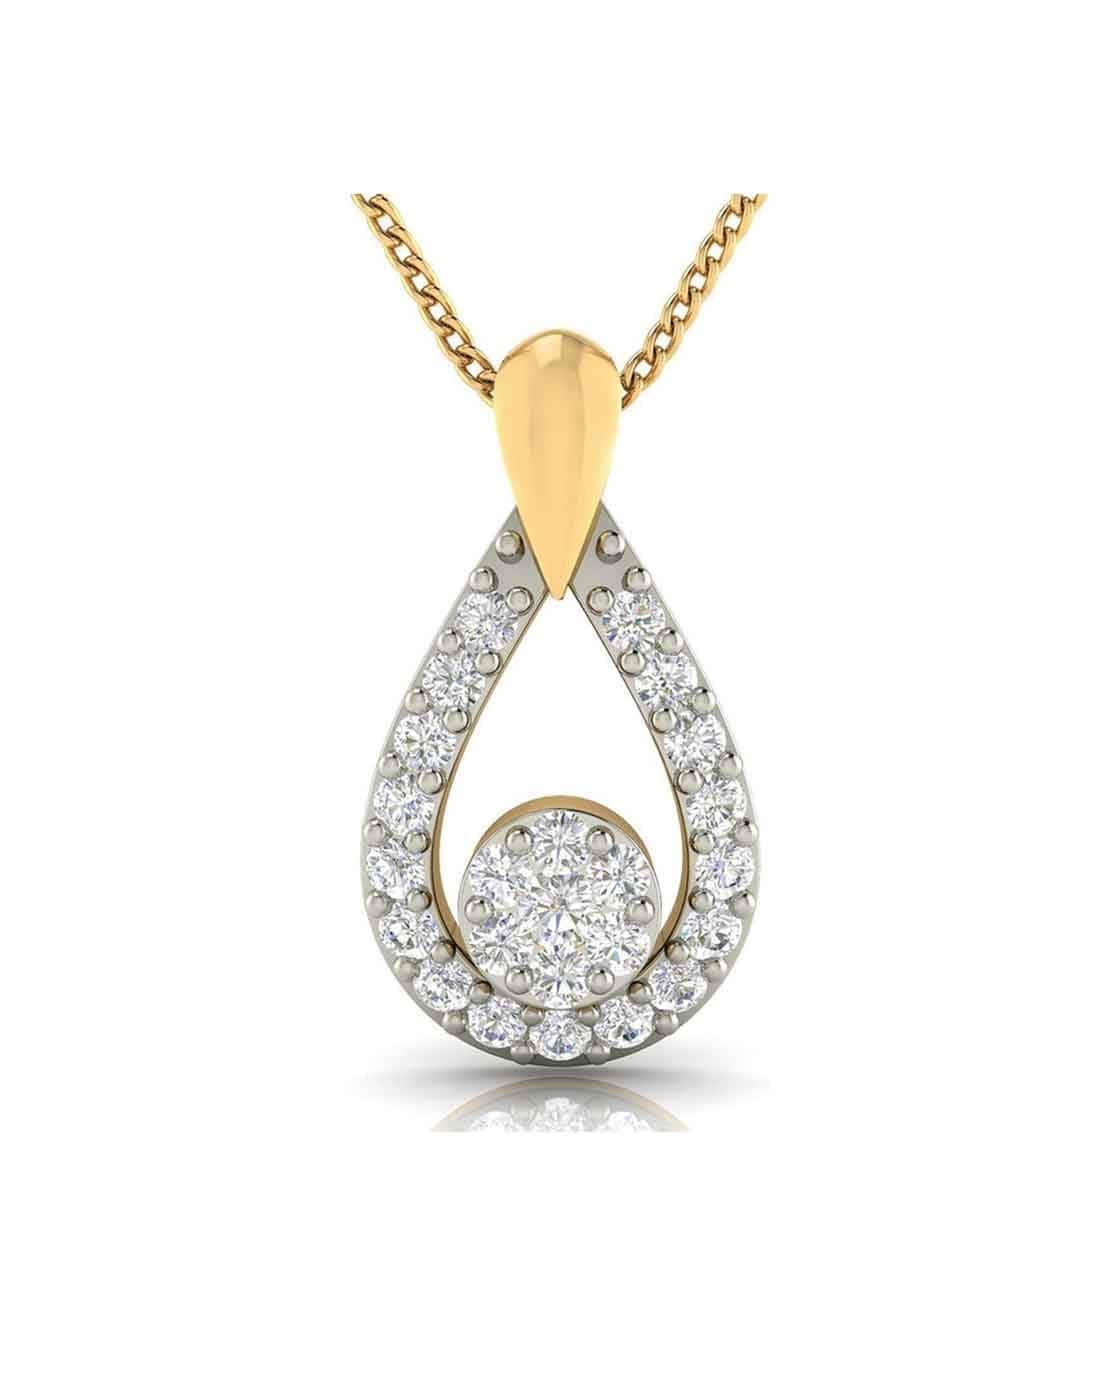 Amore Heart Diamond Necklace (21.95 ct Diamonds) in White Gold – Beauvince  Jewelry